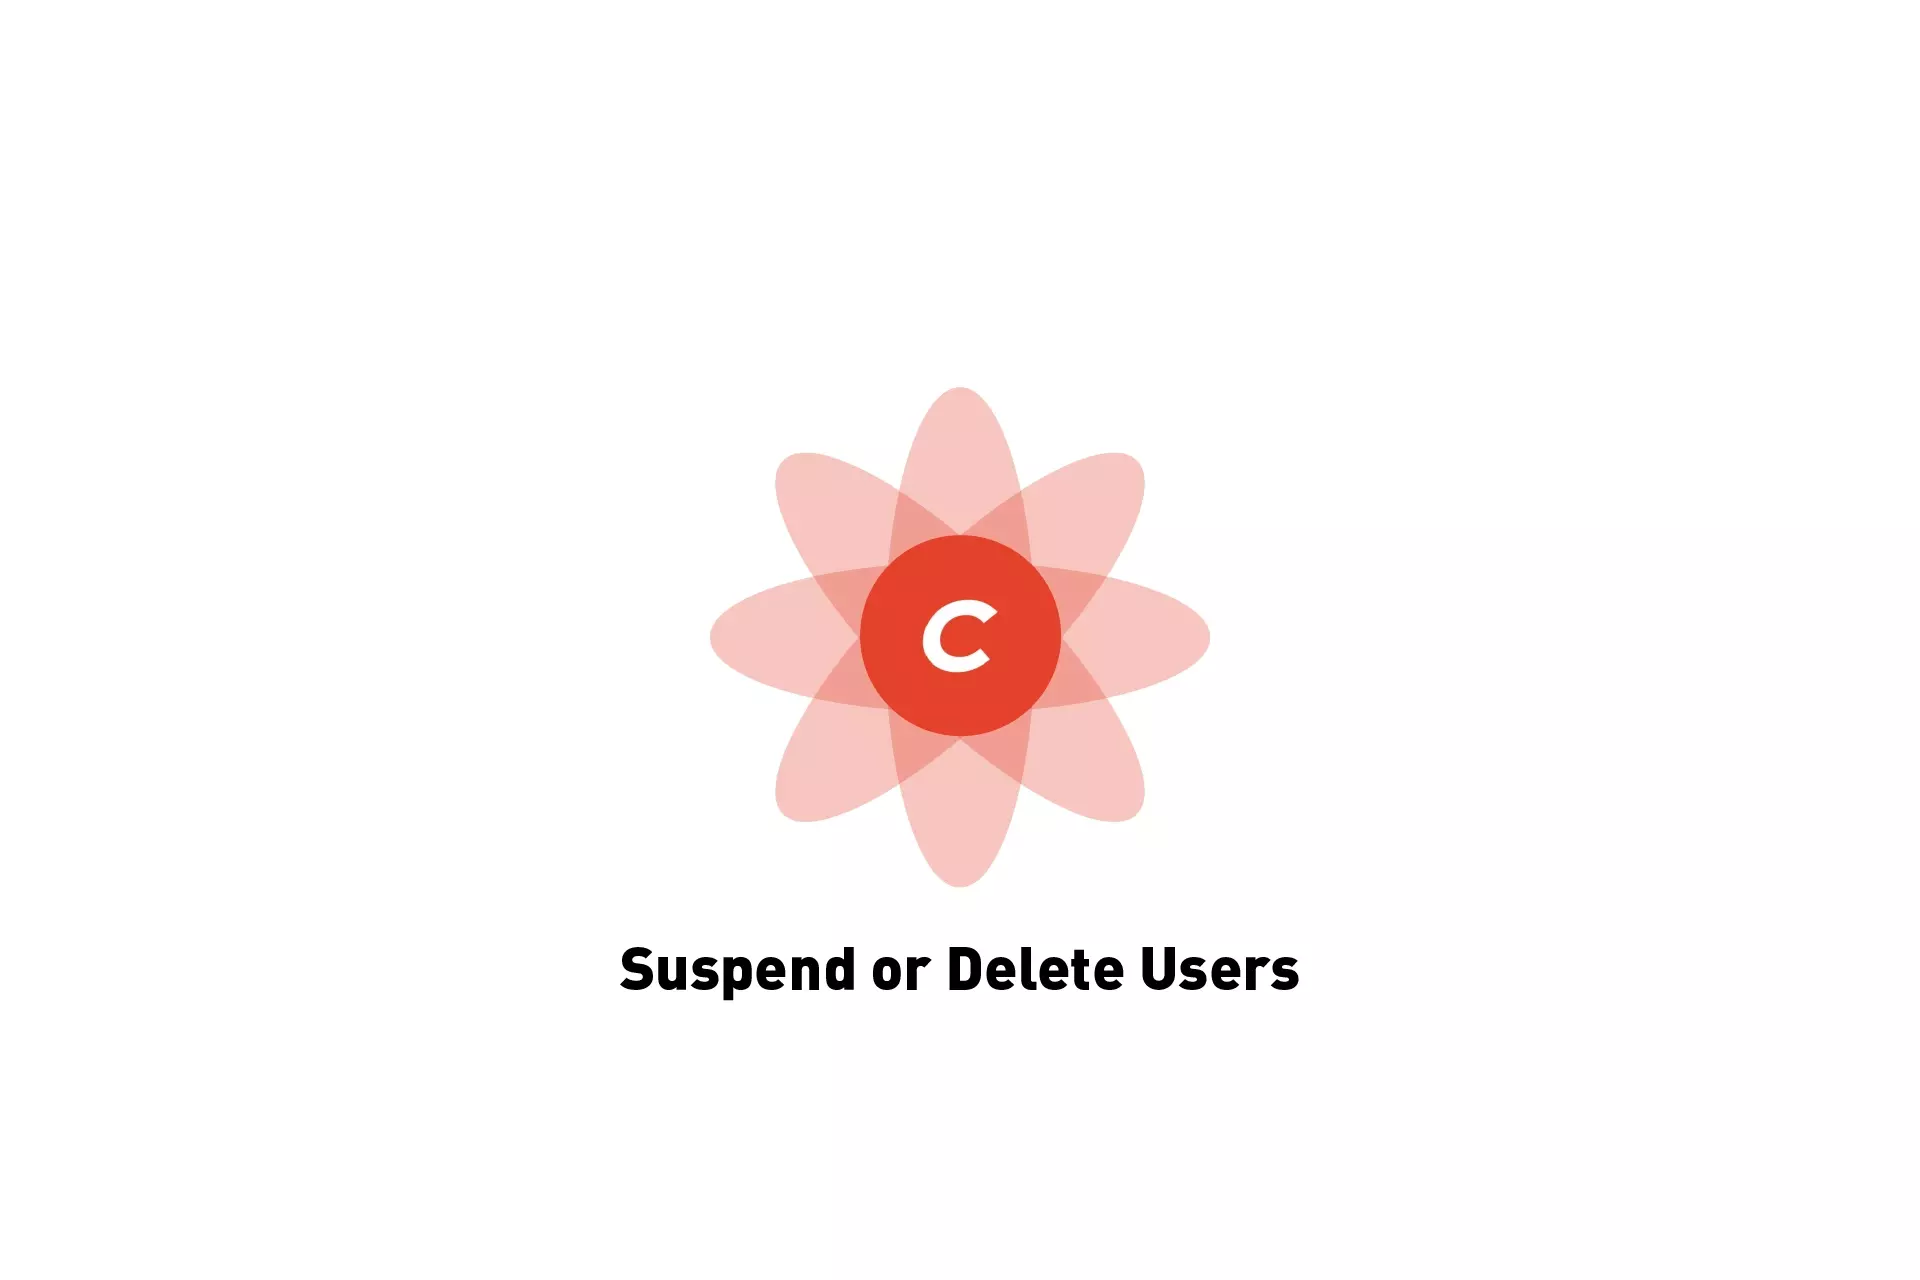 A flower that represents Craft CMS with the text "Suspend or Delete Users" beneath it.